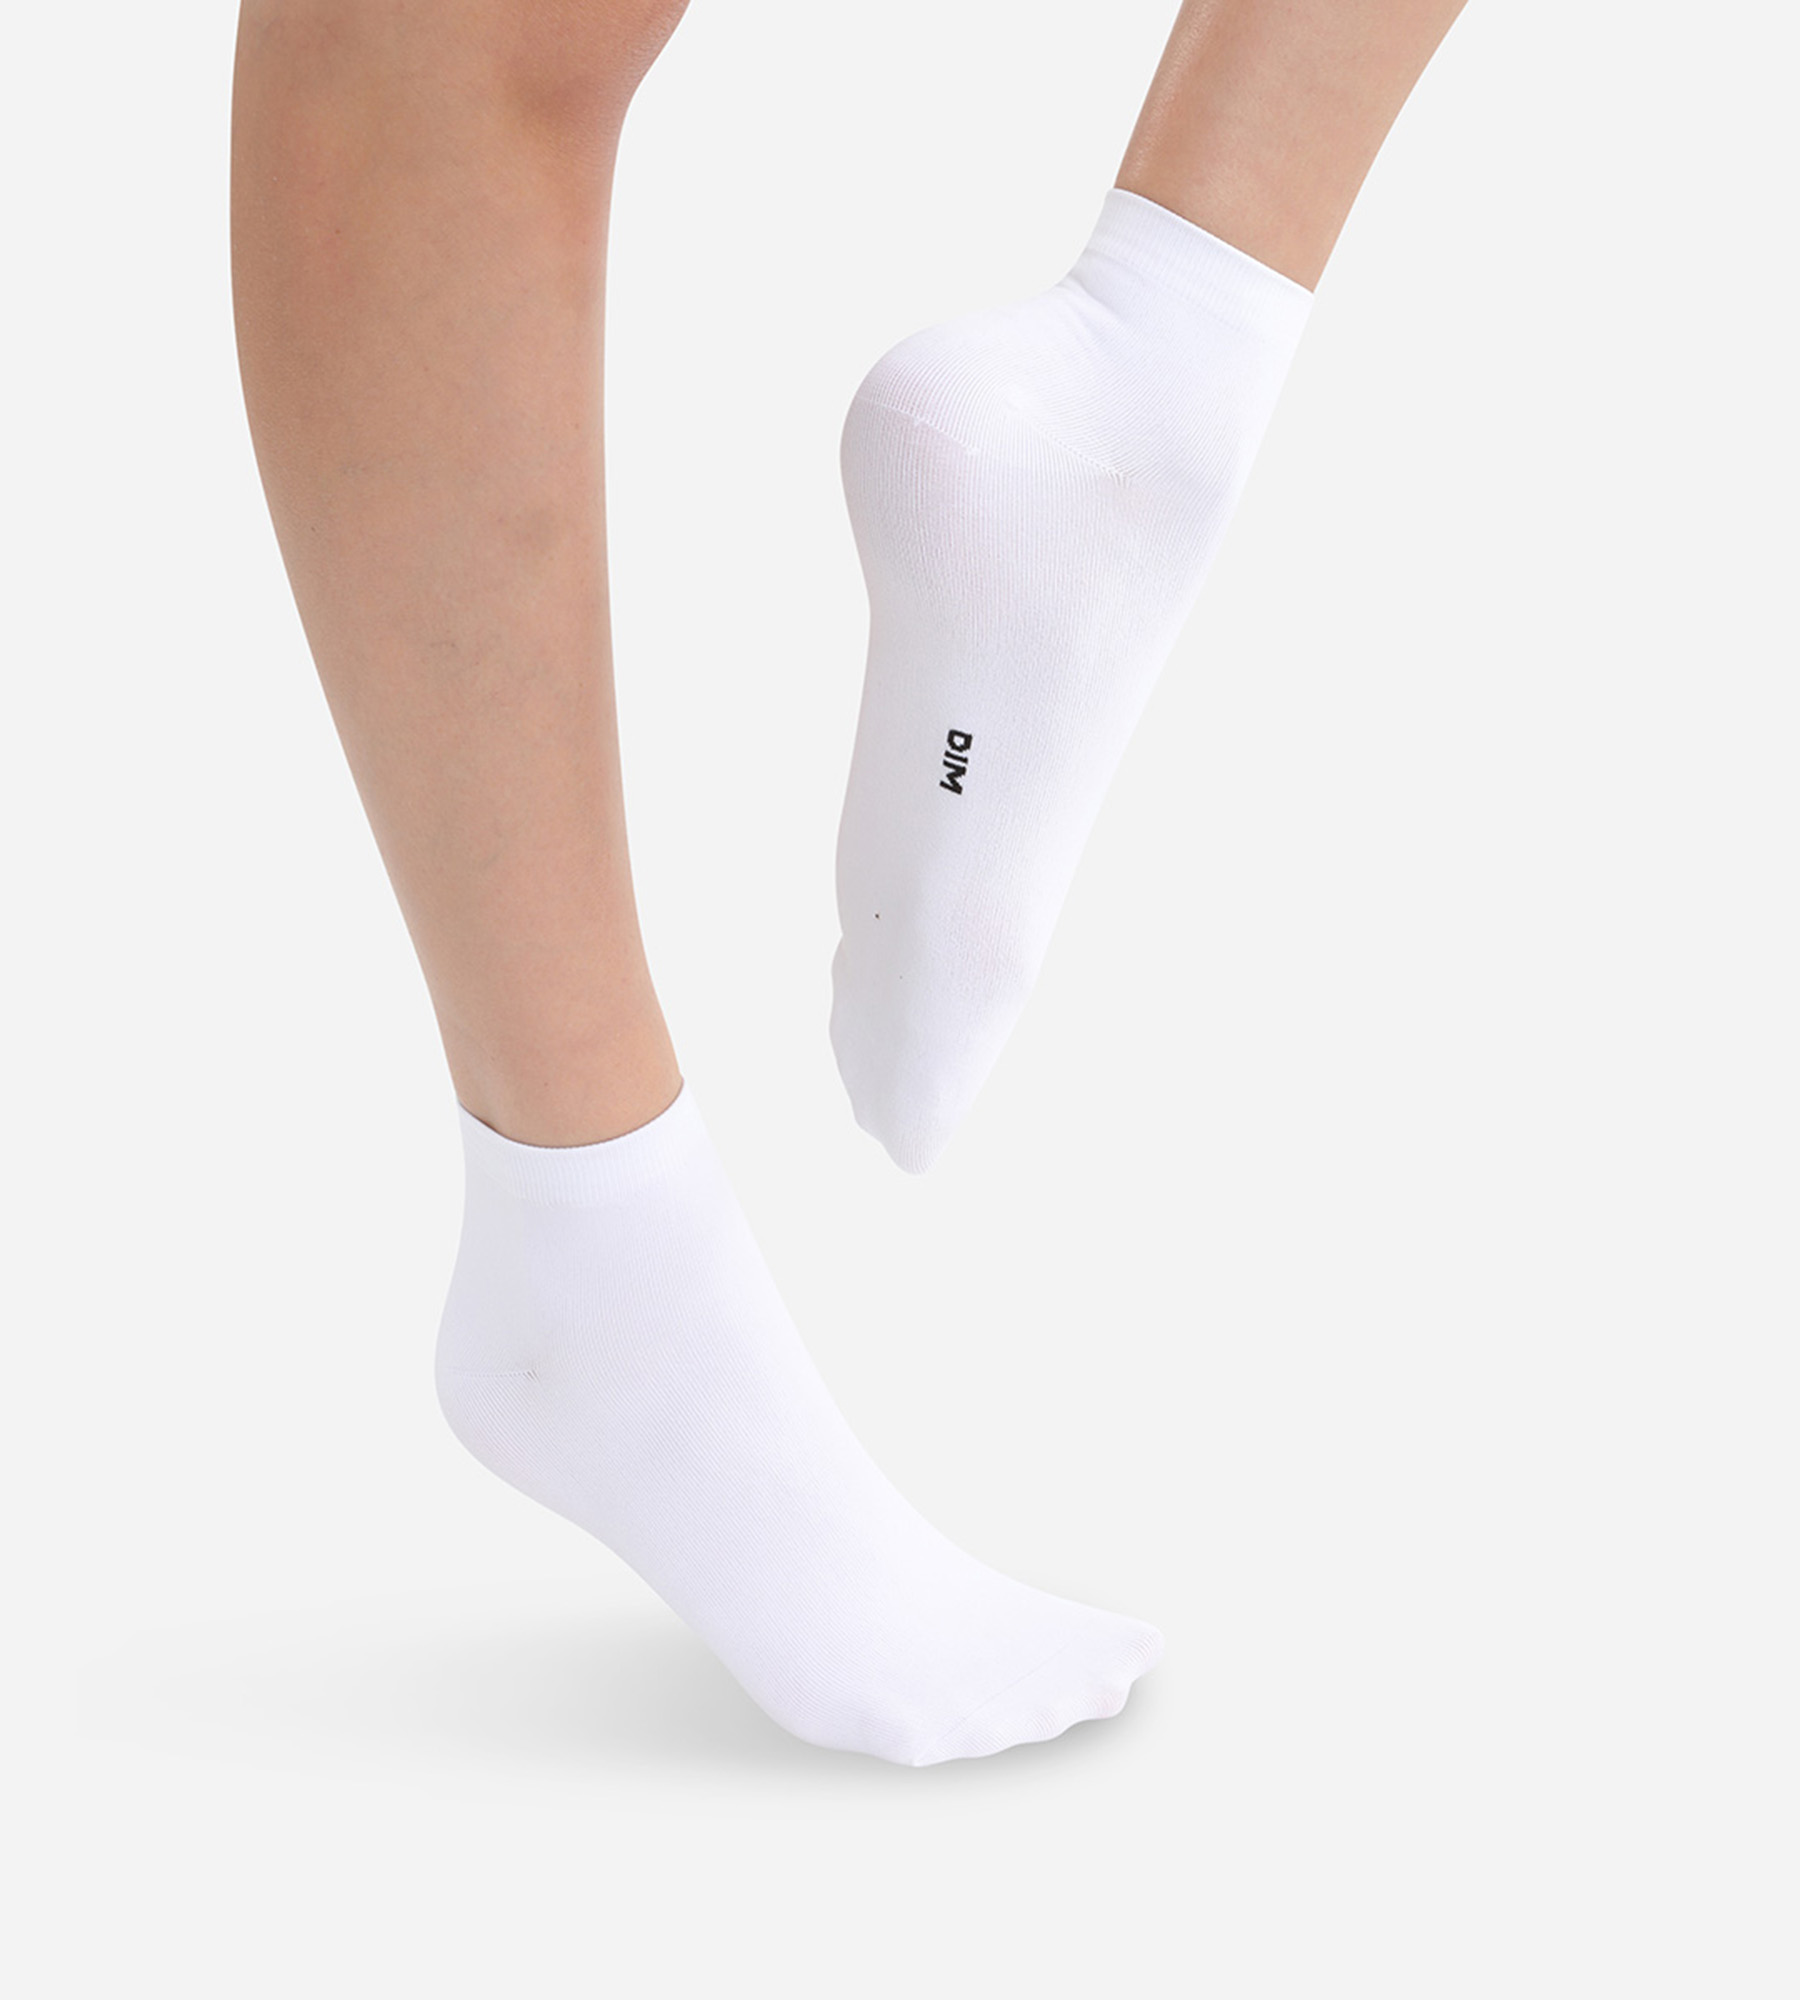 Pack of 2 pairs of women's second skin ankle socks in white